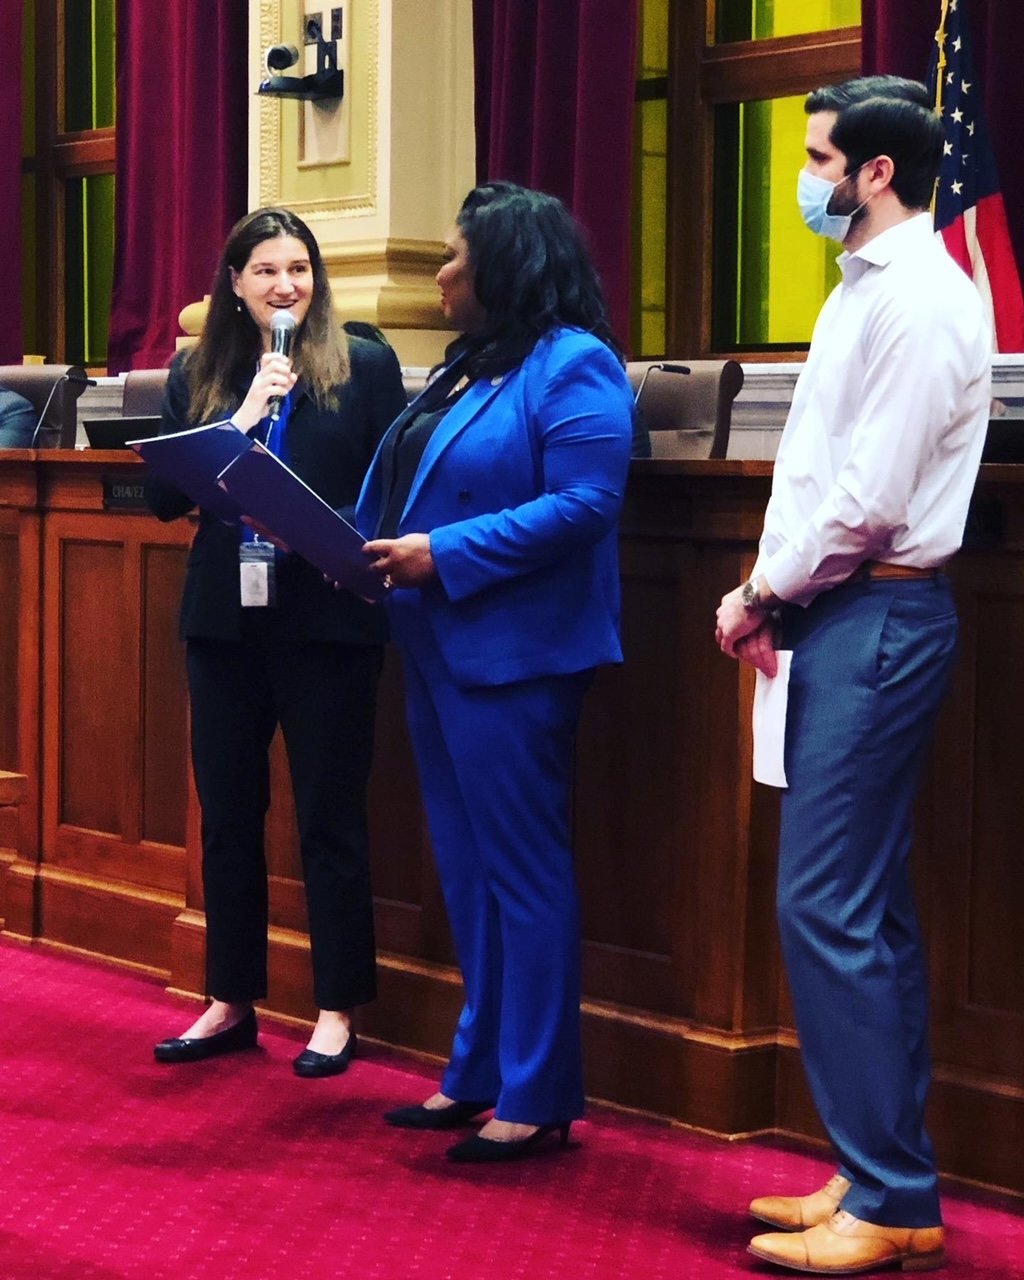 Council members Linea Palmisano (left) and LaTrisha Vetaw, along with Billy Hanlon, present at the city council on May 12 regarding a resolution supporting Myalgic Encephalomyelitis/Chronic Fatigue Syndrome Awareness Day. (Photo submitted)